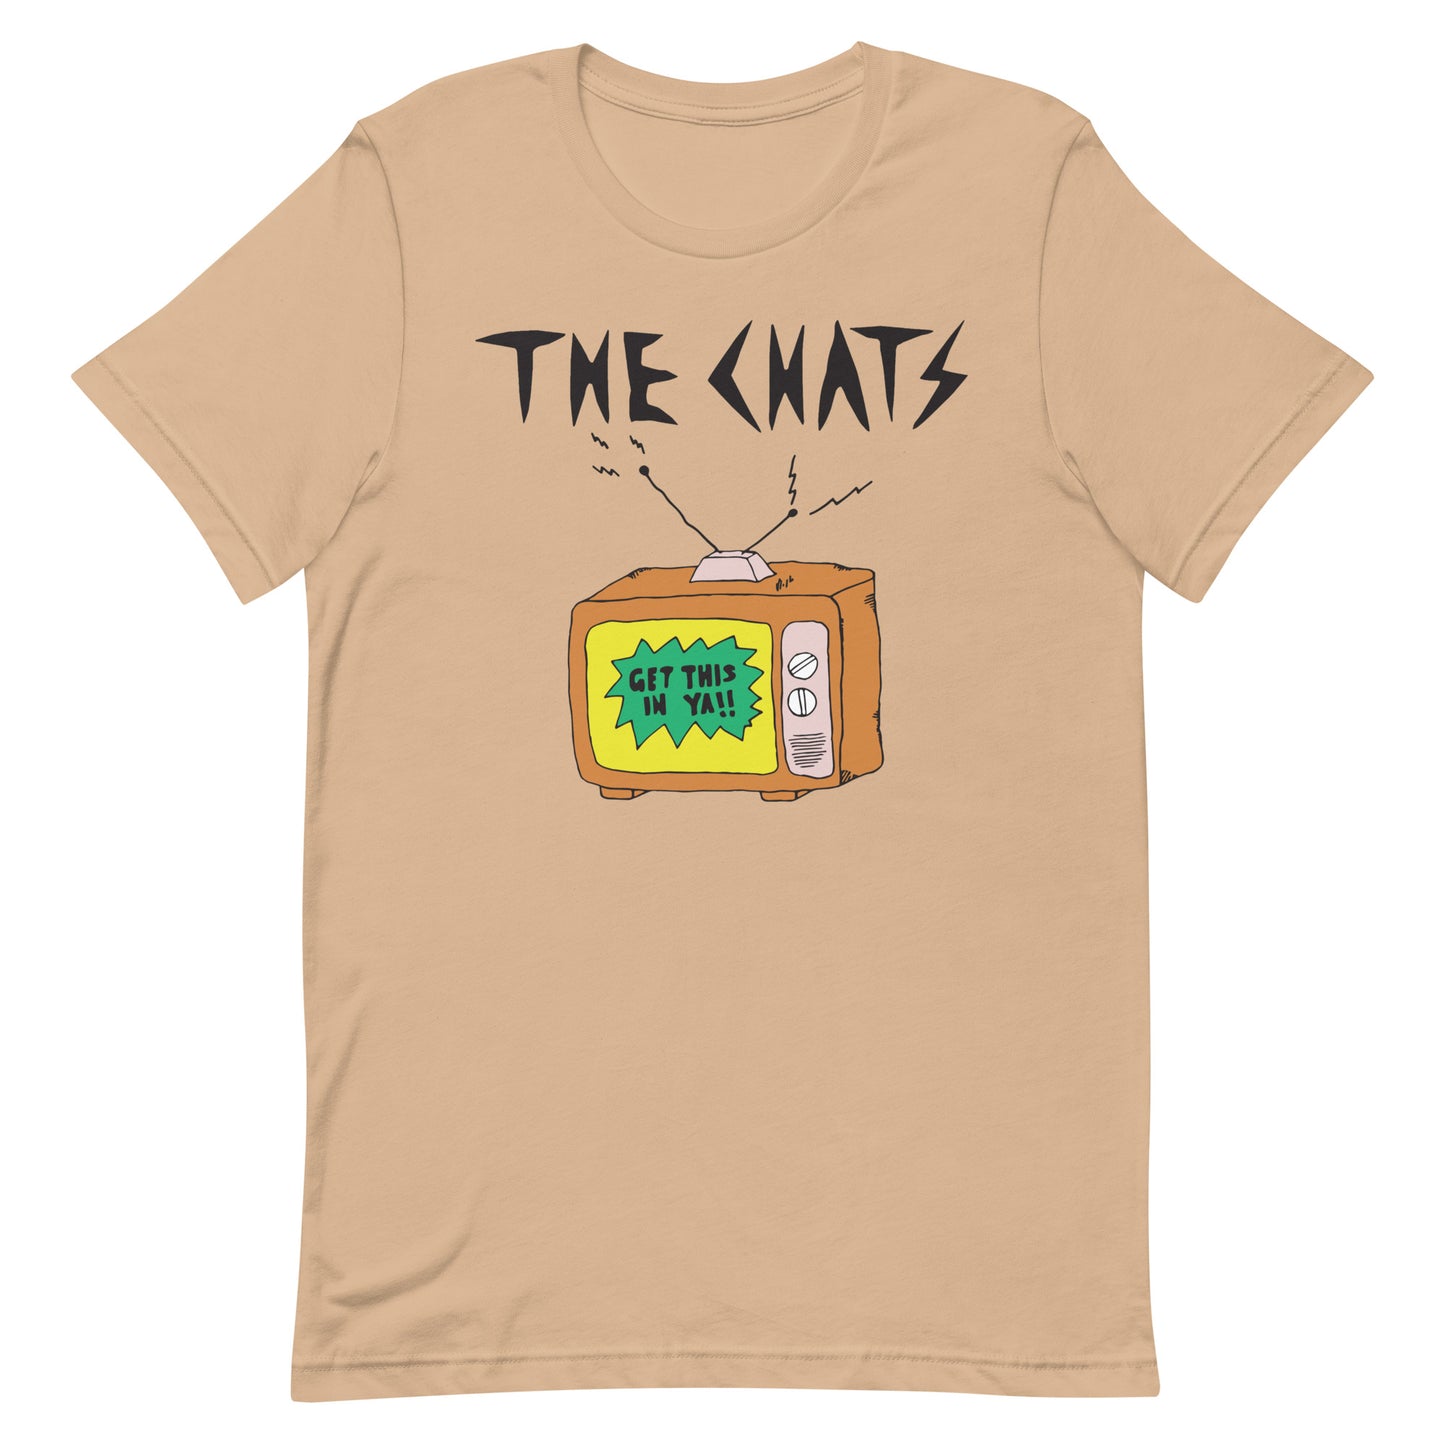 Chats - Get This In Ya!! T-Shirt